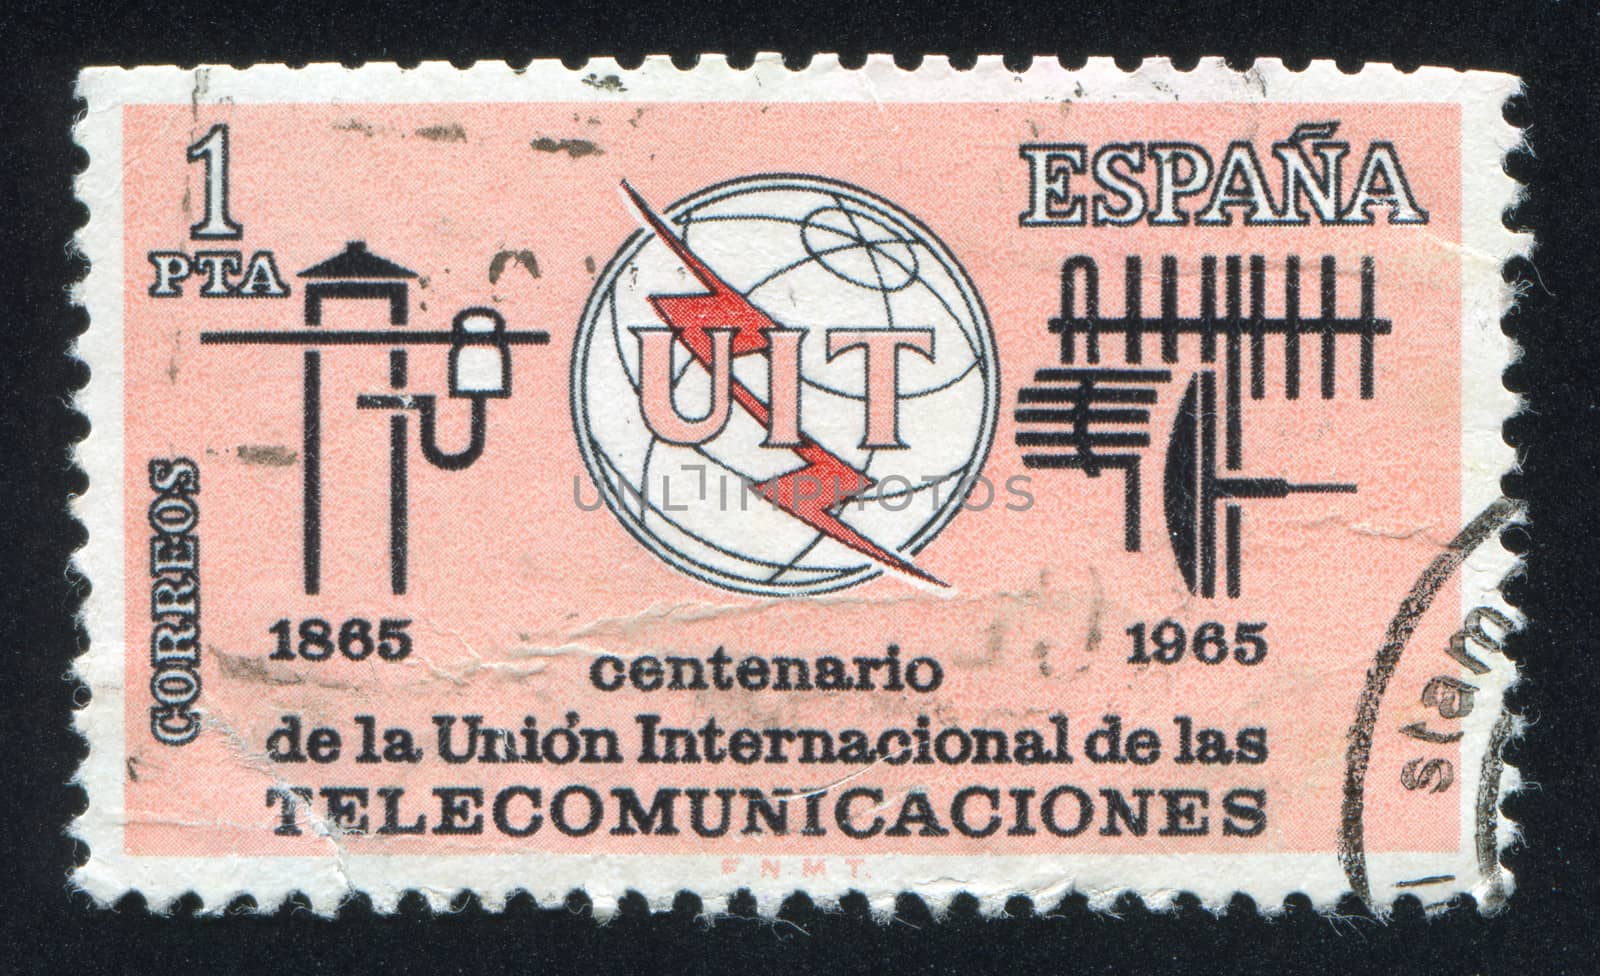 SPAIN - CIRCA 1965: stamp printed by Spain, shows International Telecommunication Union Emblem, Old and New Communication Equipment, circa 1965